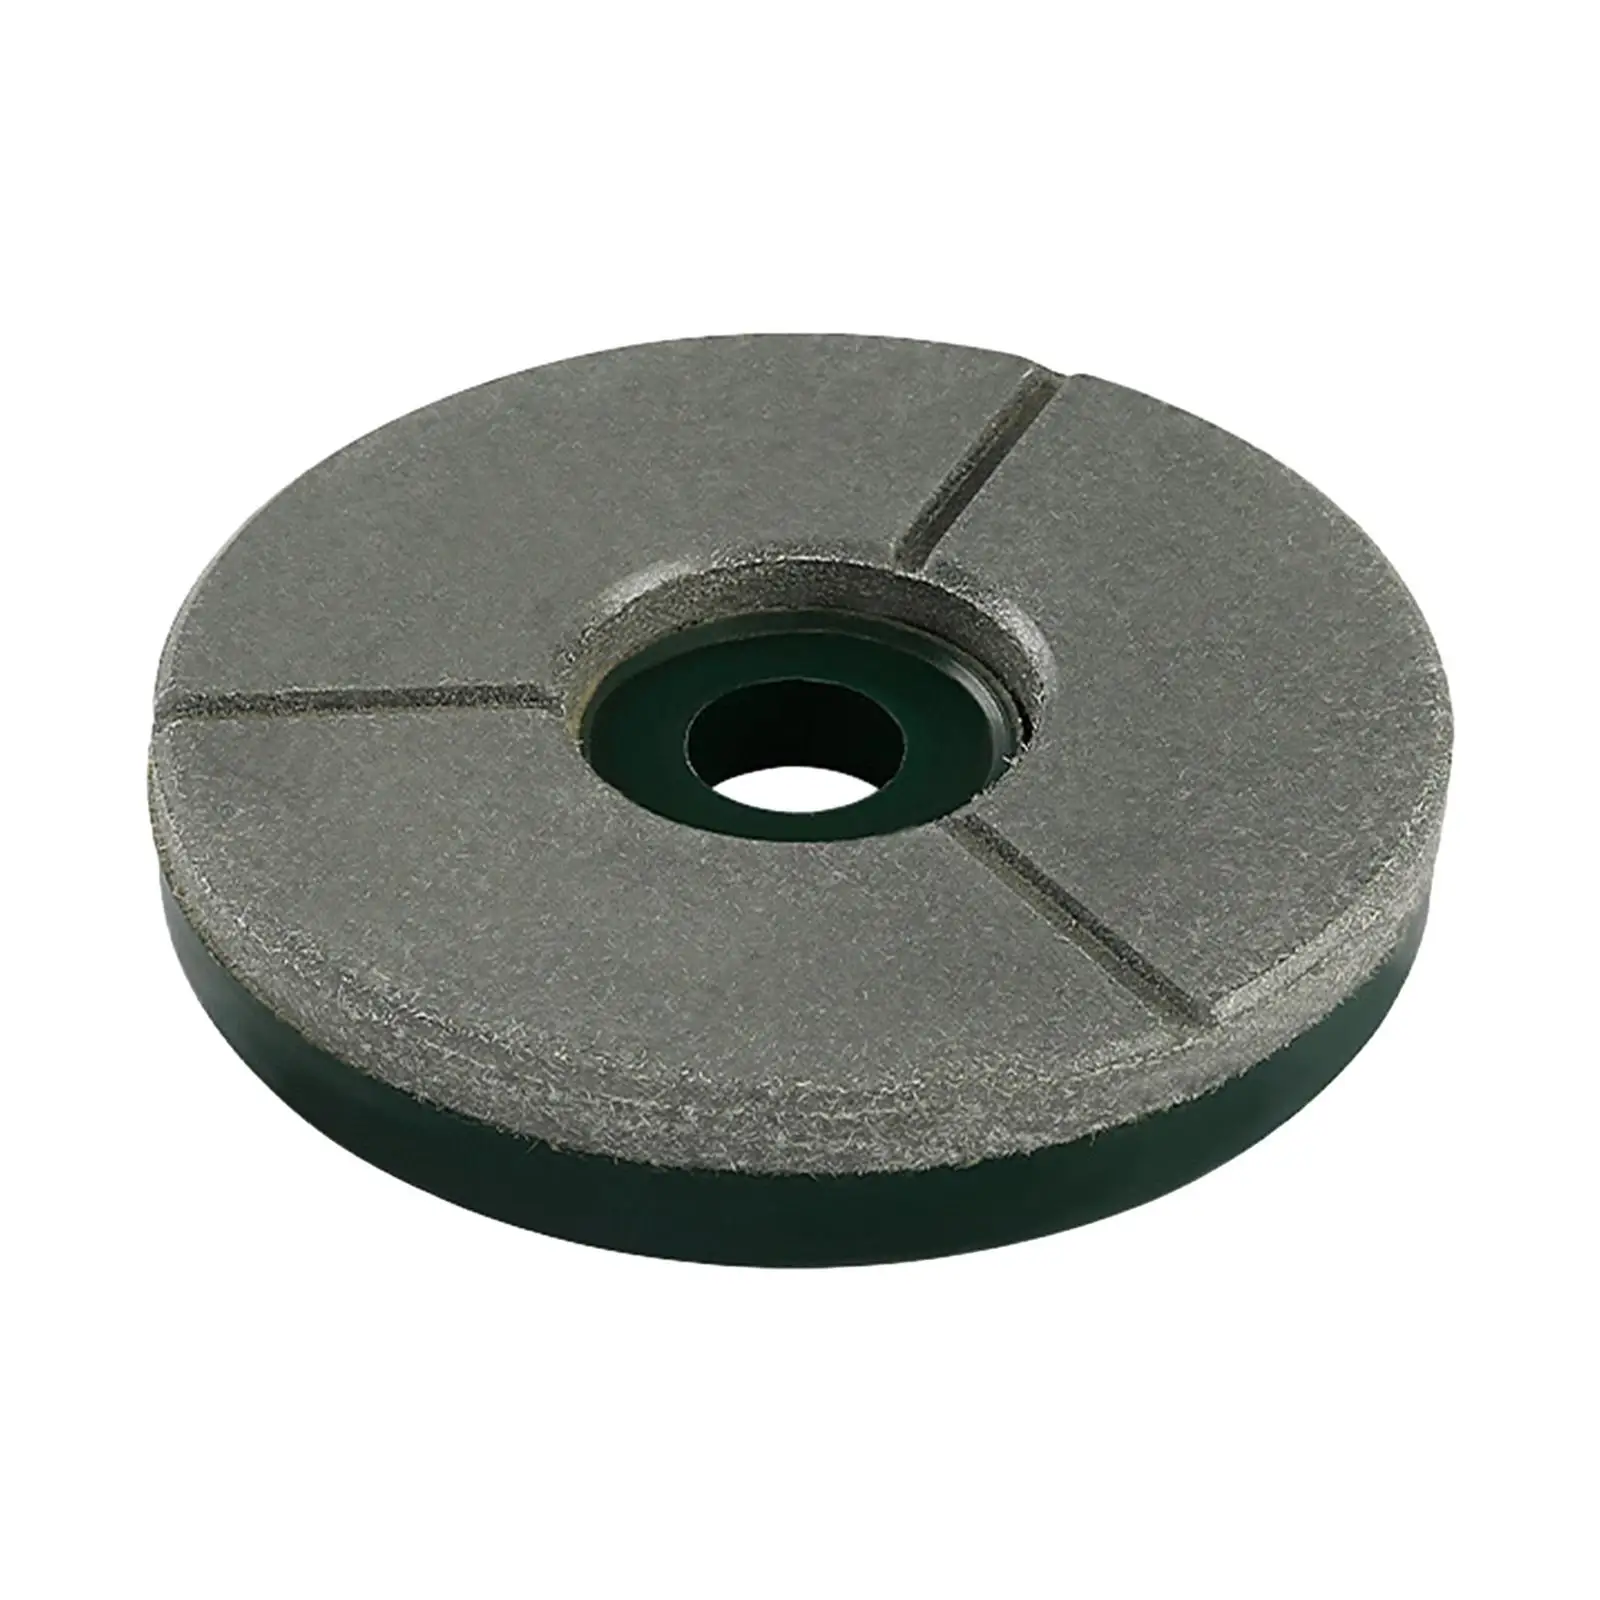 Grinder Polishing Disc Lapping Disc Easy Installation 150mm for Granite Artificial Stone Tombstones Slabs Building Materials